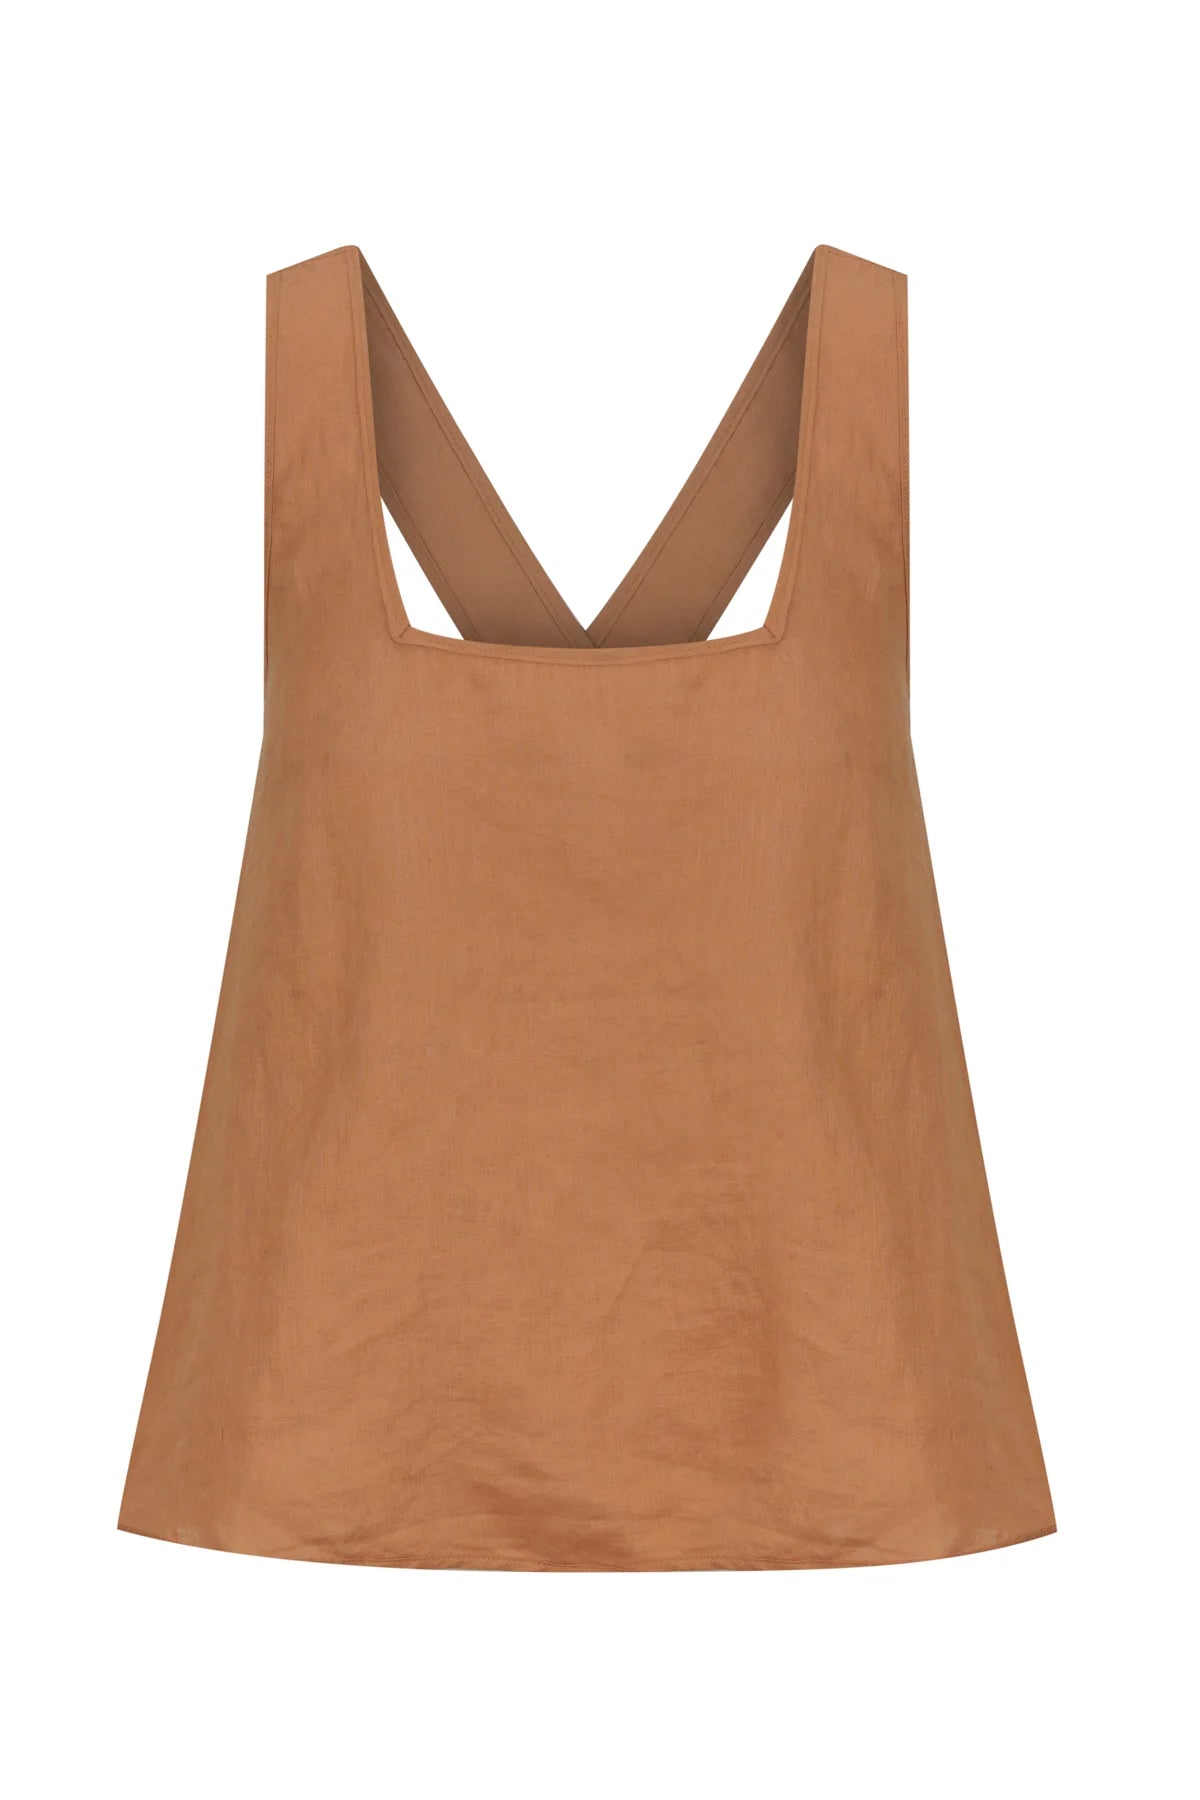 Brown linen top with cross over straps at the back